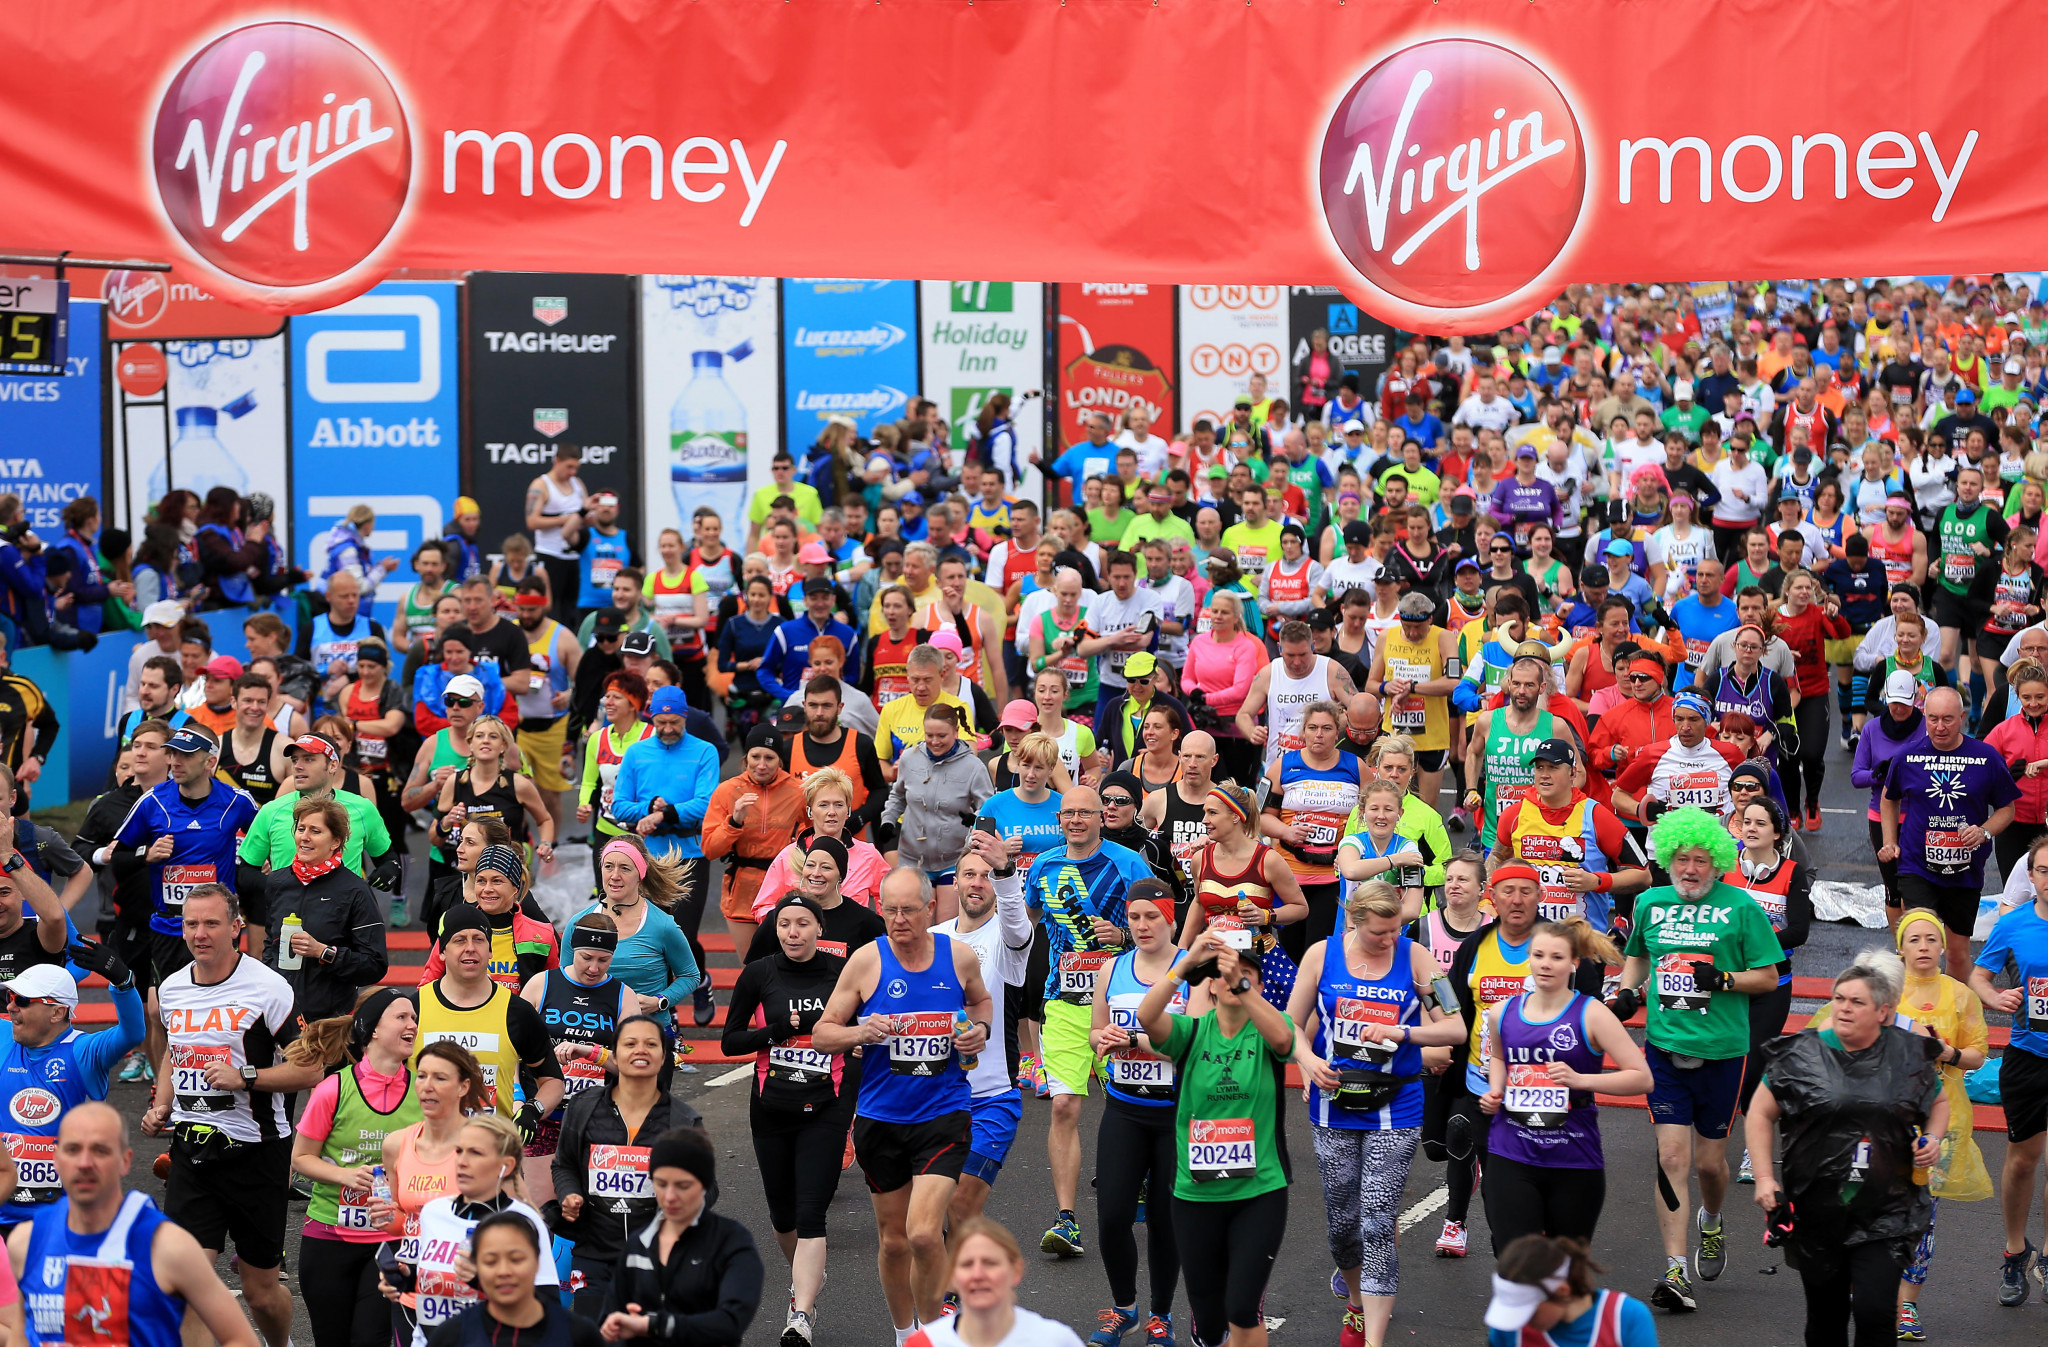 London Marathon organisers planning record-breaking race in 2021 featuring 100,000 participants